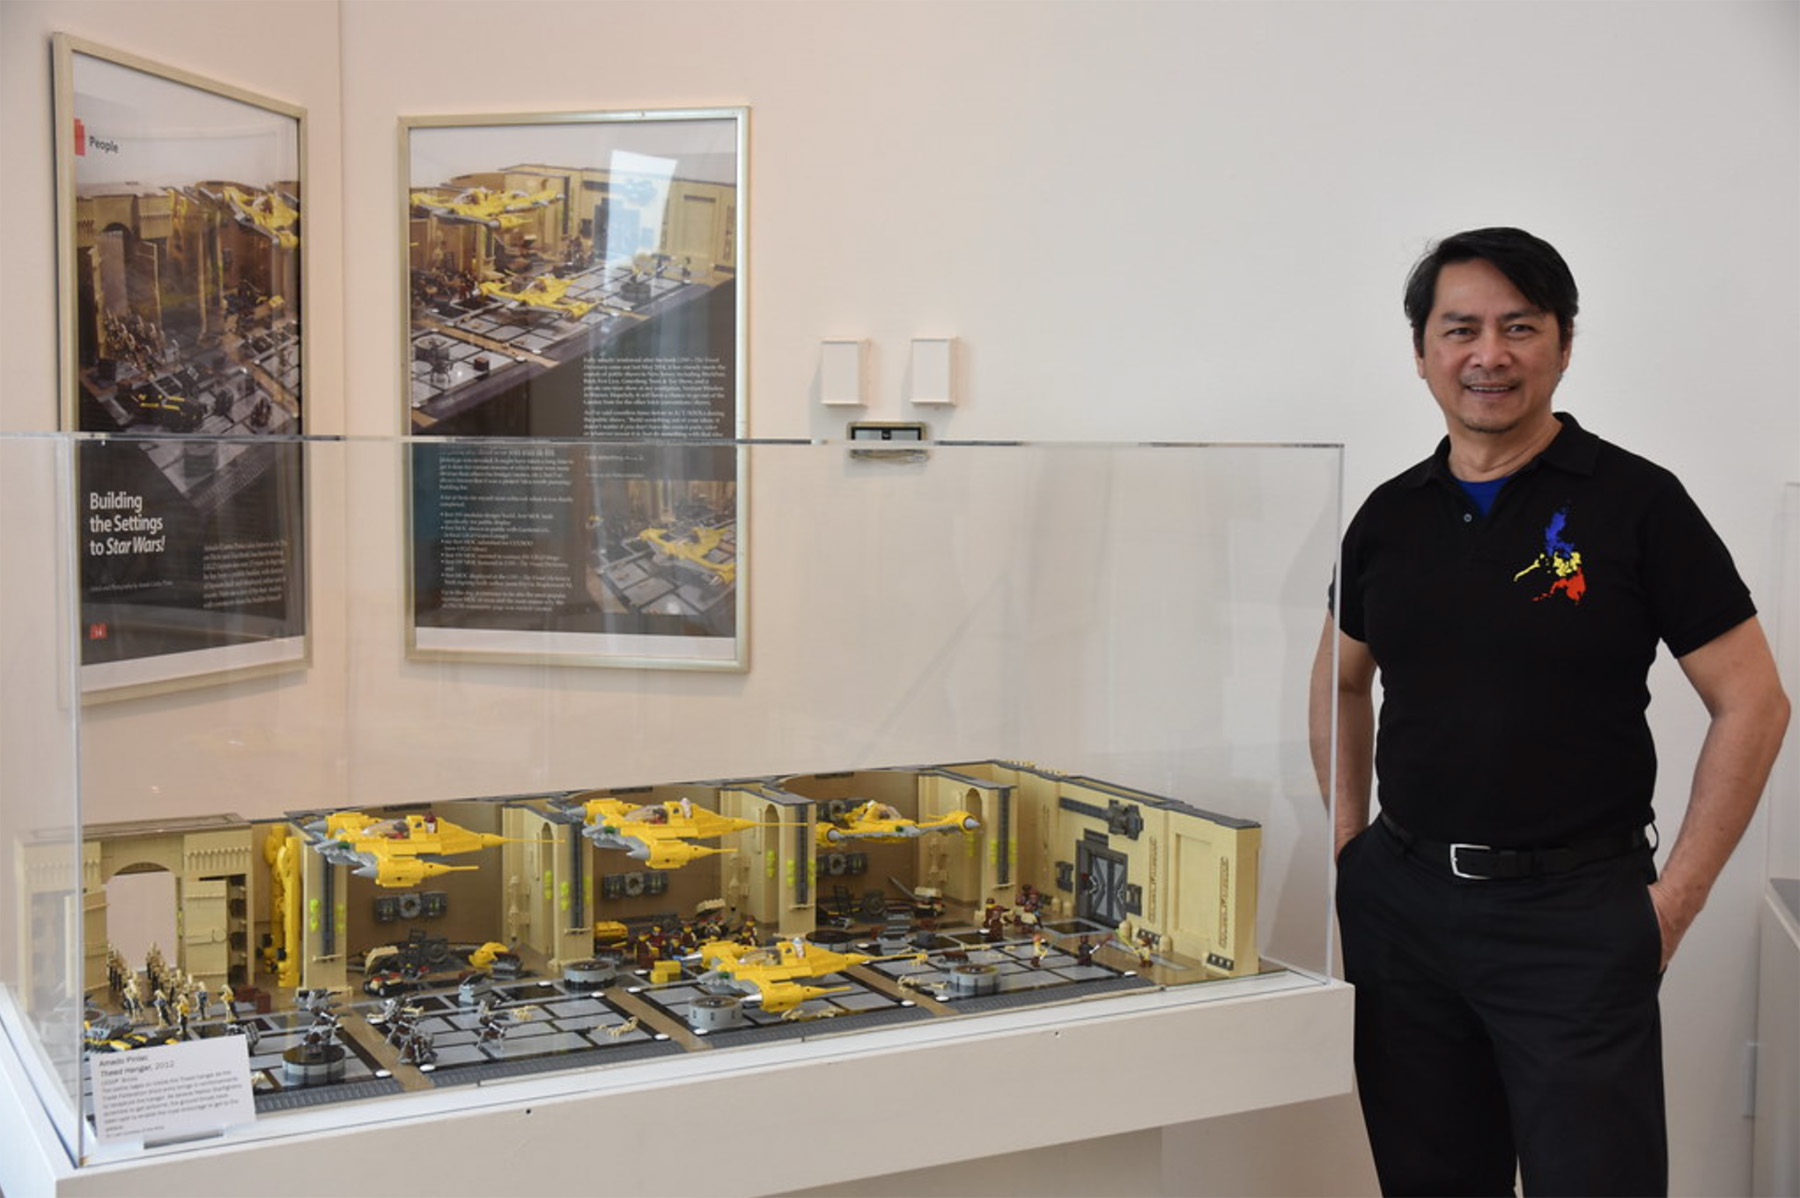 Amado Pinlac, known on social media as ACPin, is a Master LEGO artist who often tours with Brick Convention is shown with his favorite MOC, Theed Hangar.